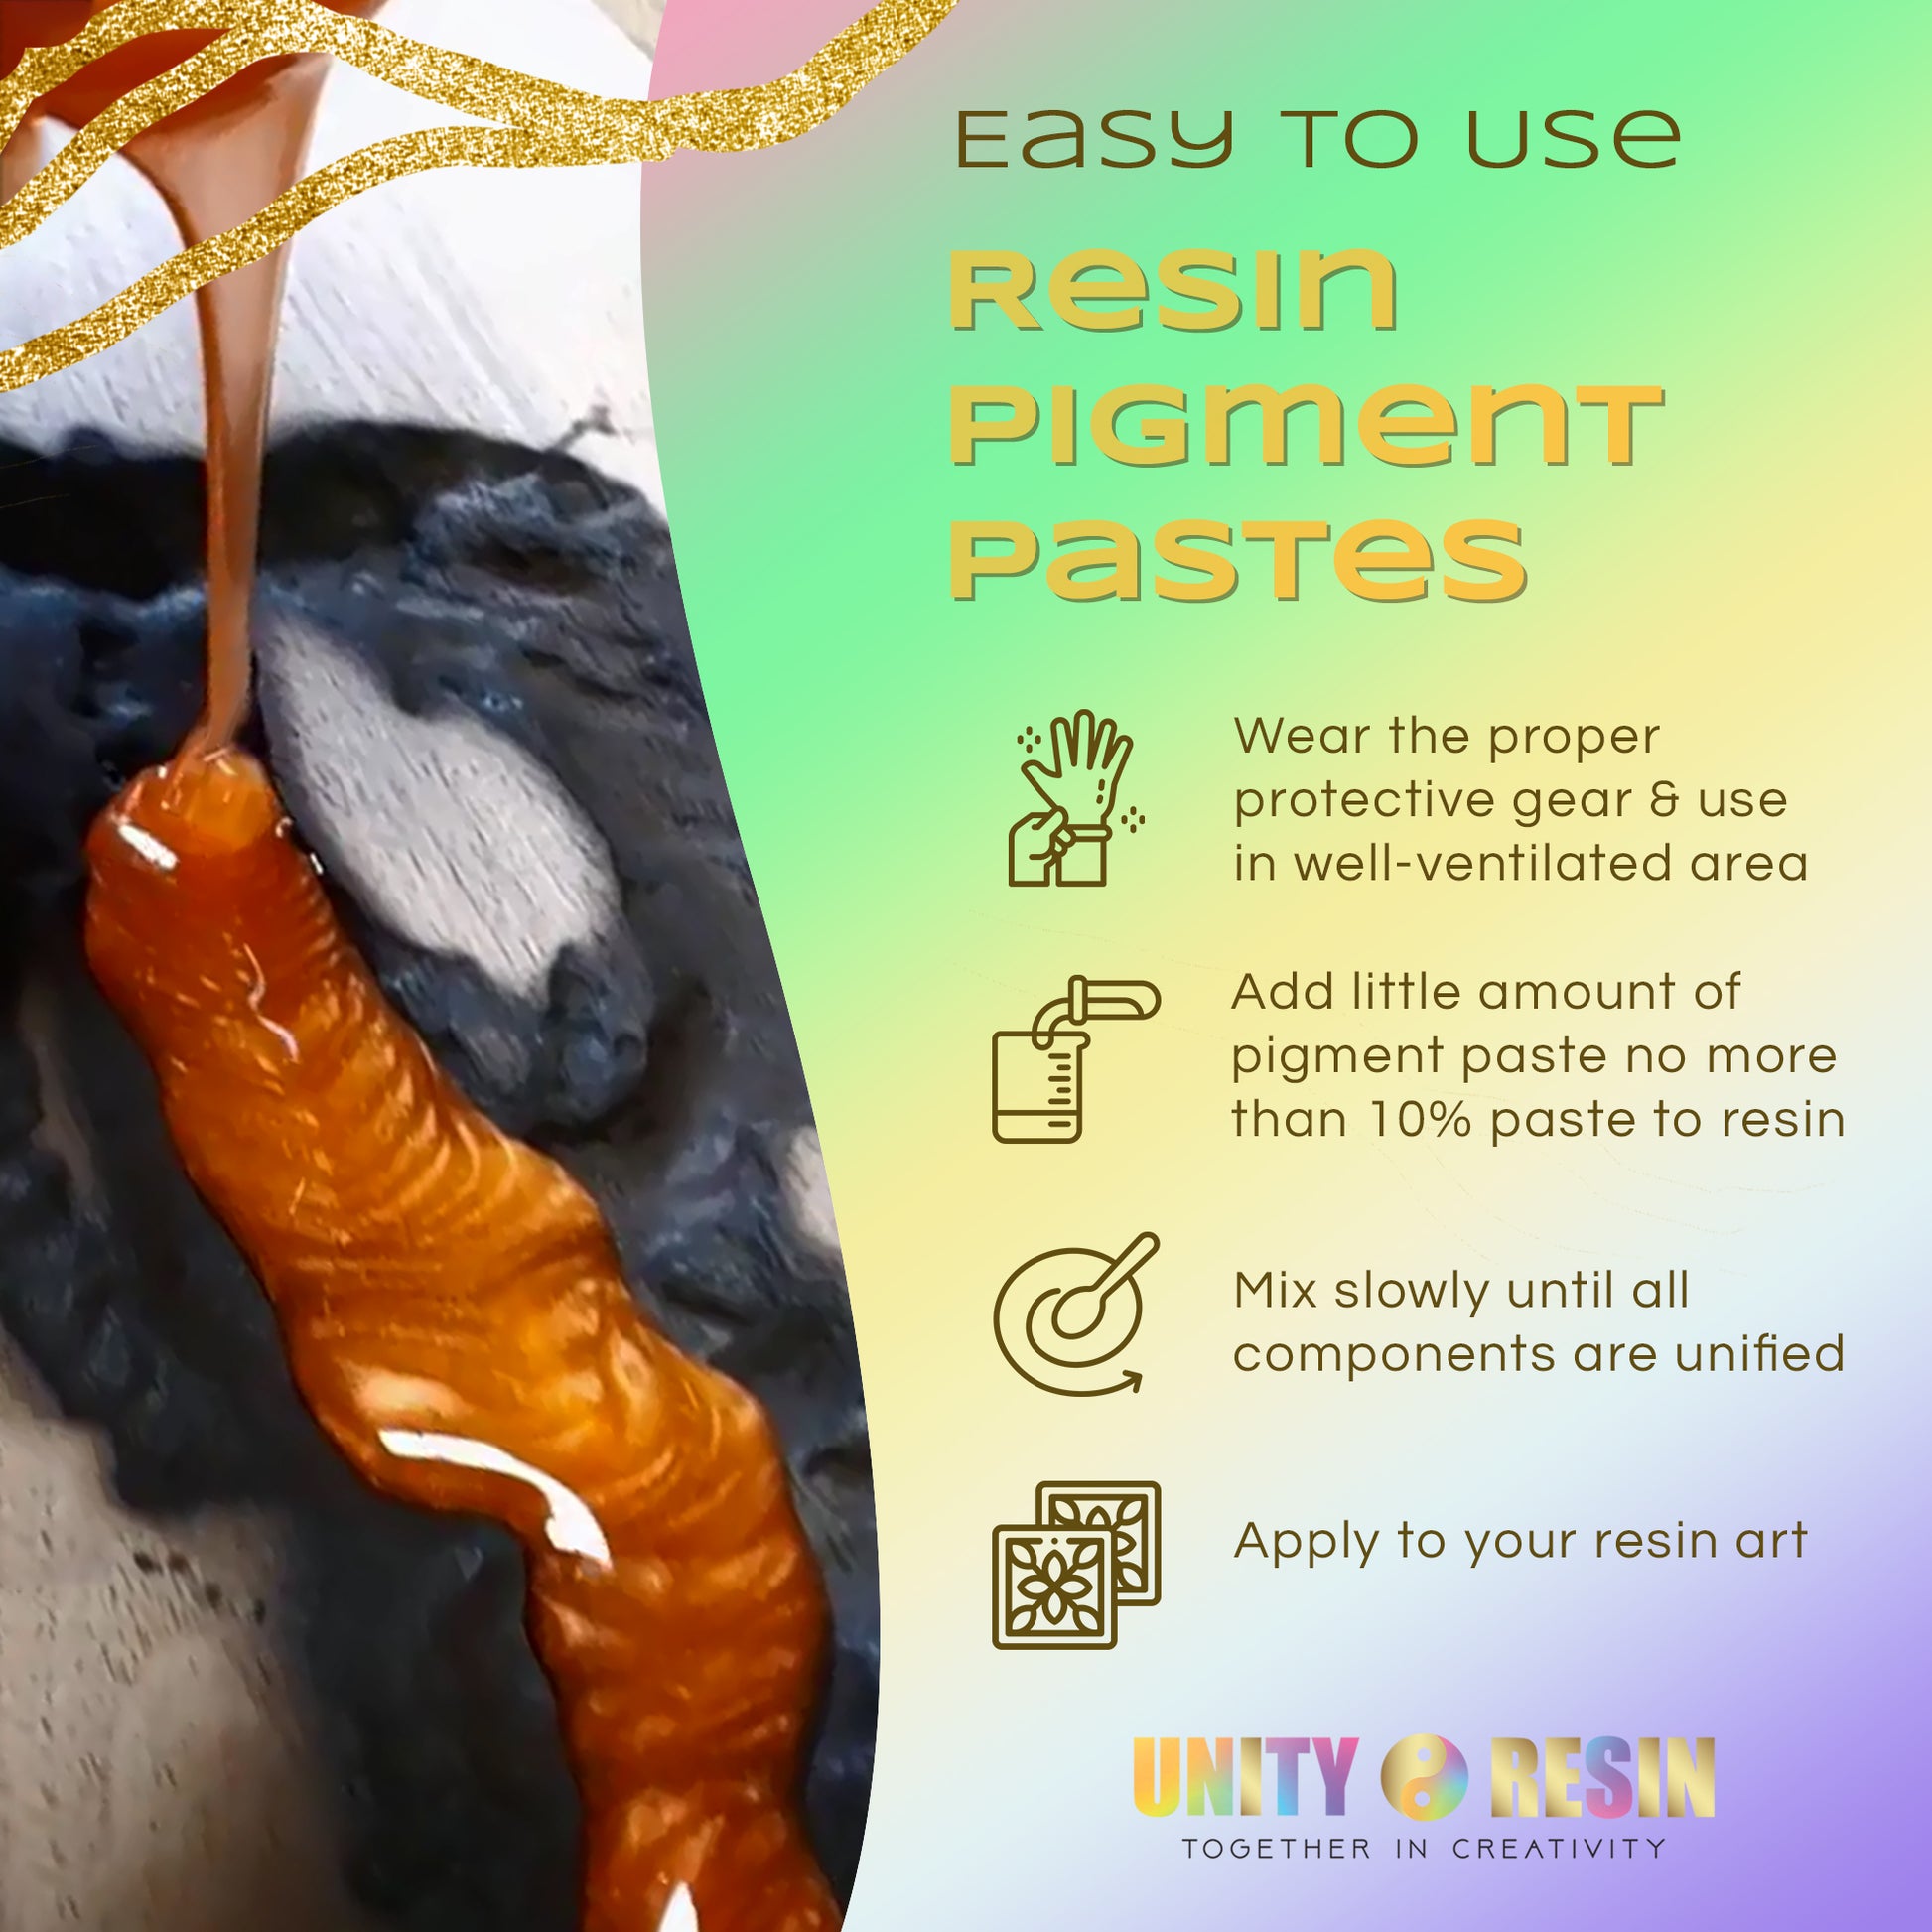 Ultra-Luxe Epoxy Resin Pigment Paste-GLEAMING GOLD (100G)